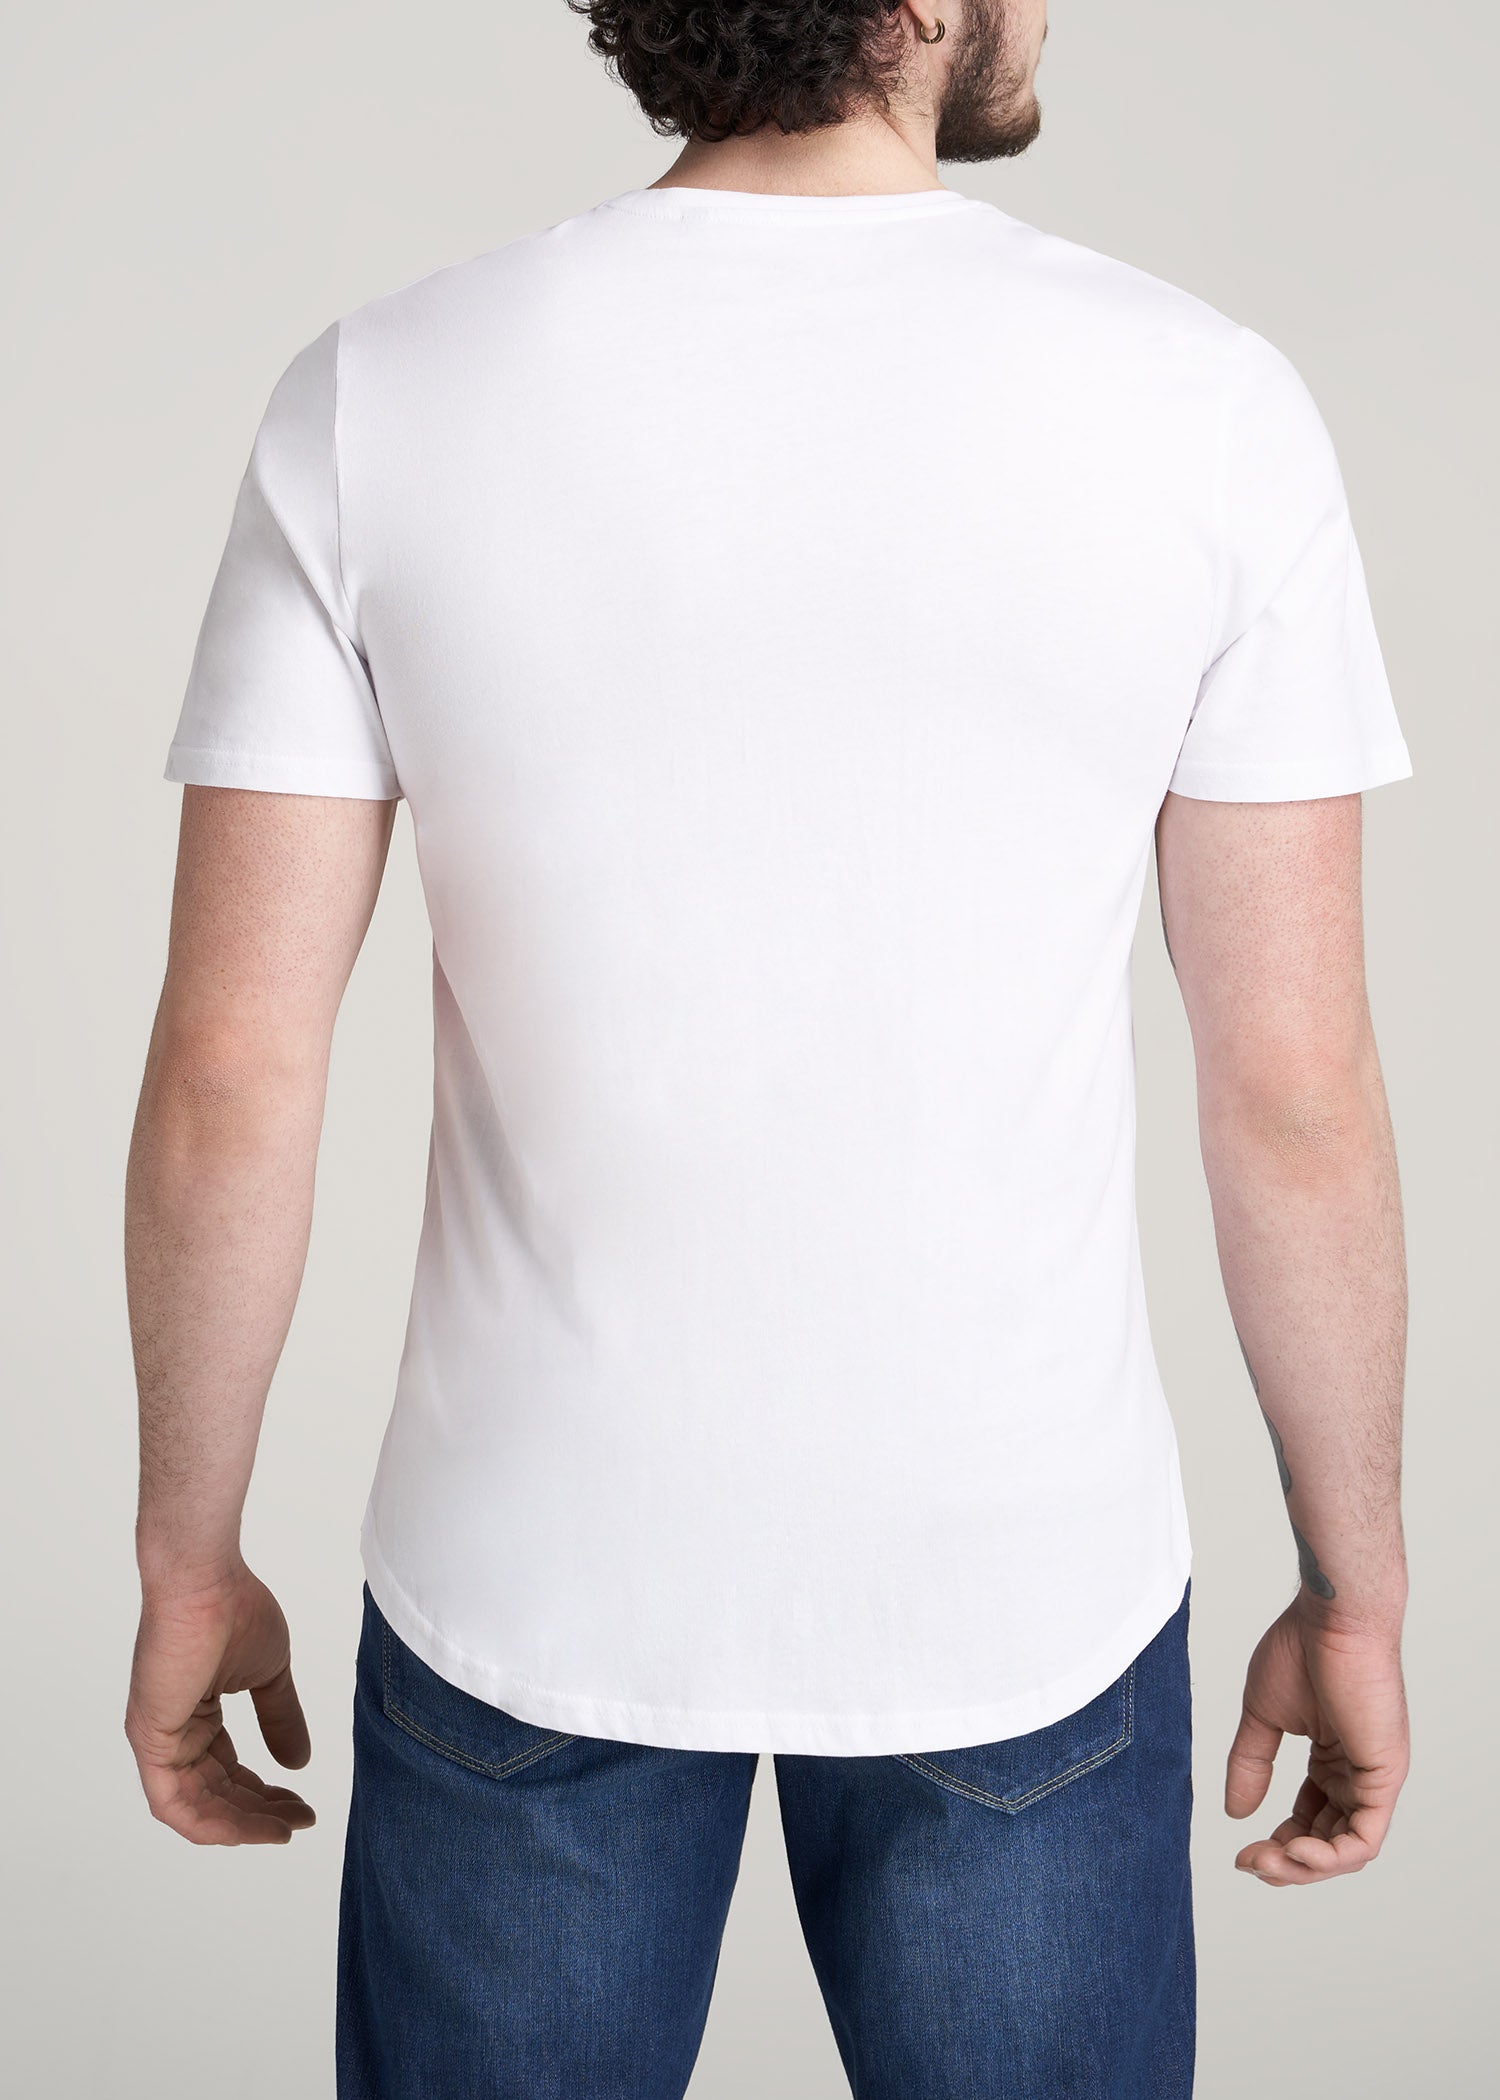 Buy online White Back Printed T-shirt from top wear for Men by